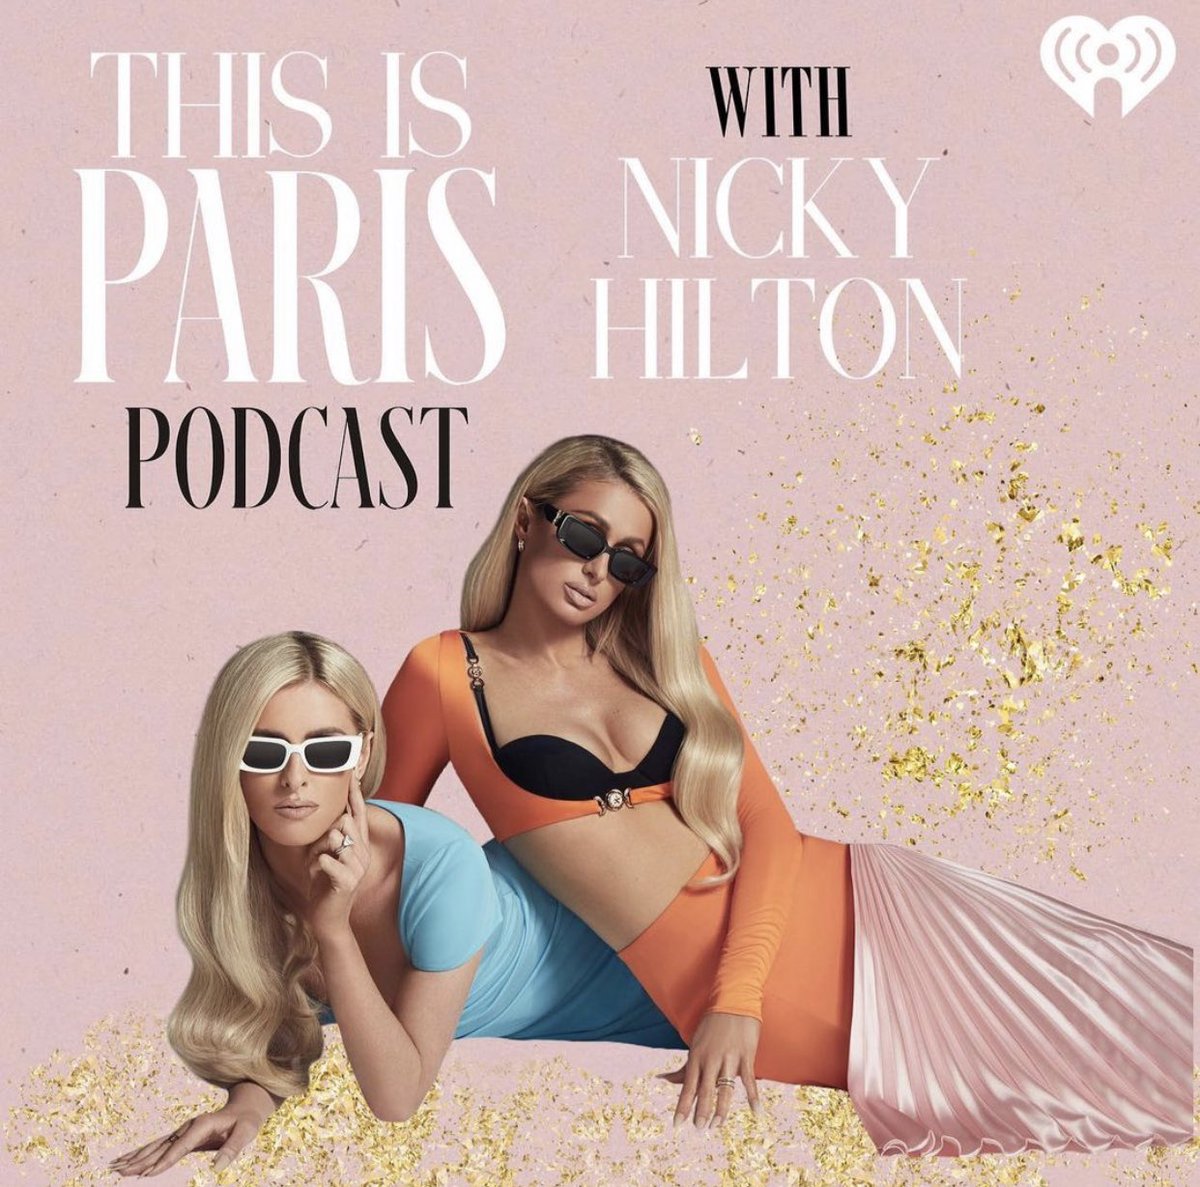 So much fun being a guest on @ParisHilton podcast! Listen here:  